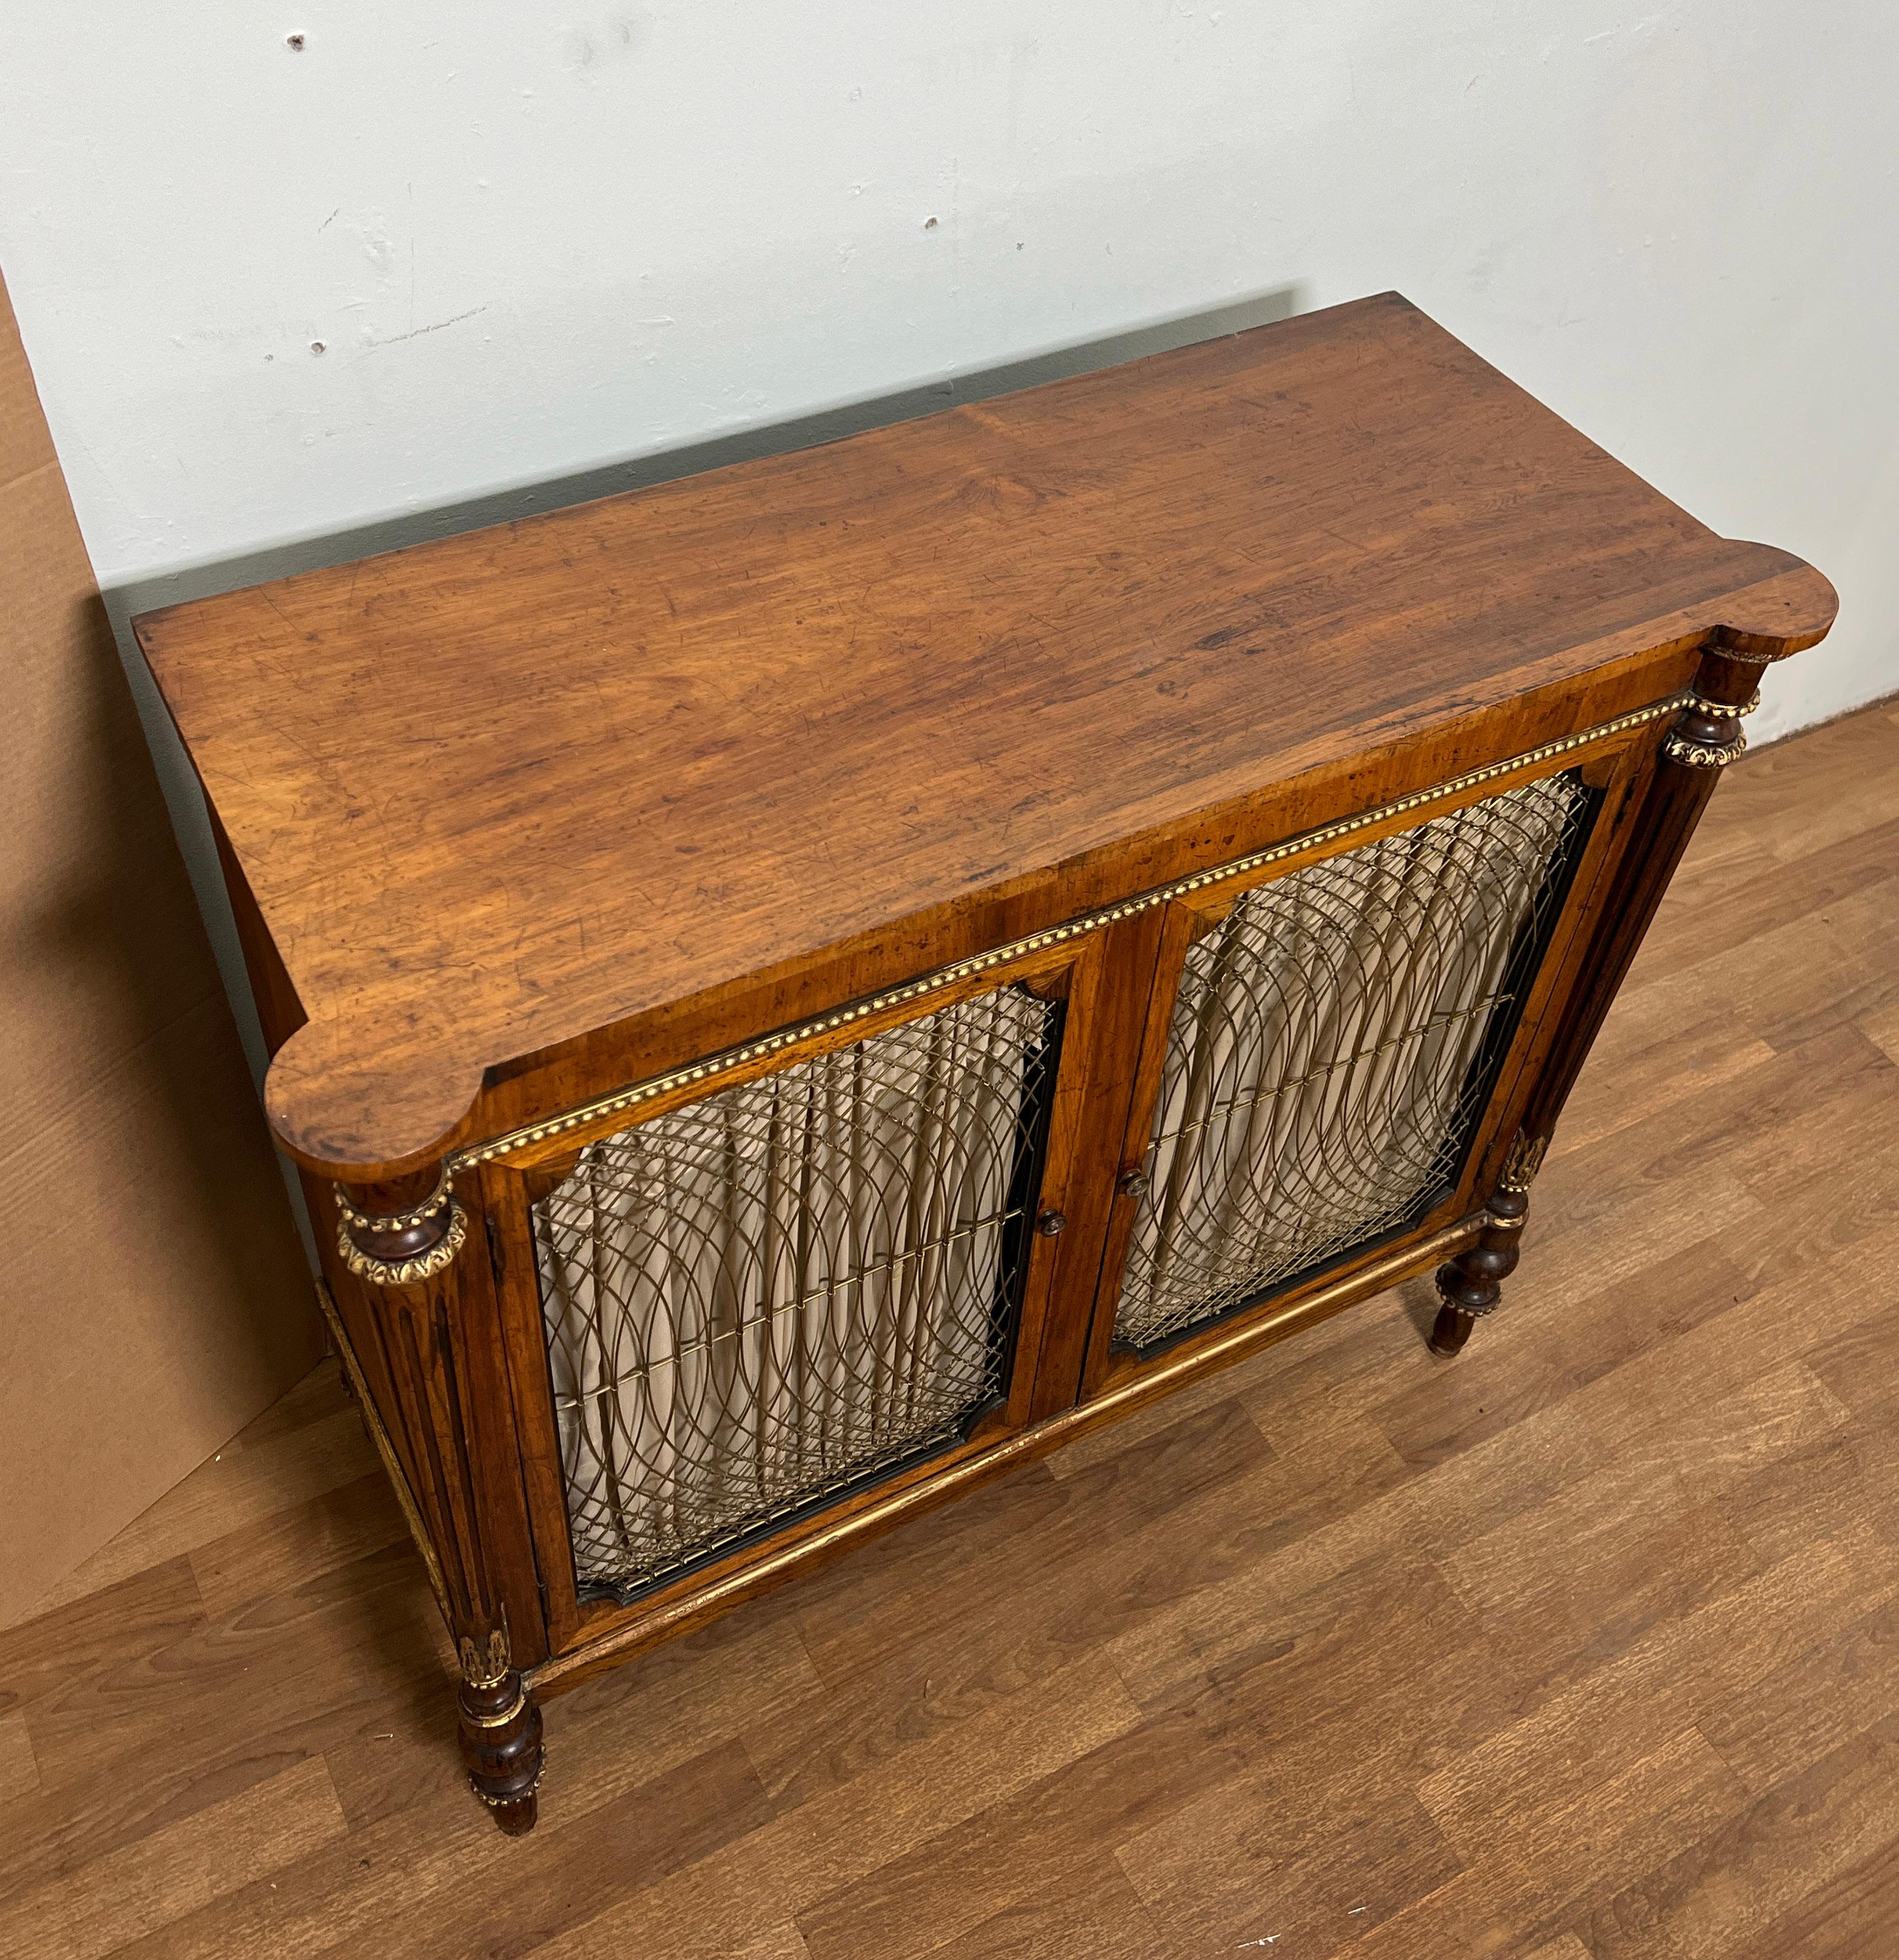 British Early 19th Century English Regency Grill Front Rosewood Credenza For Sale